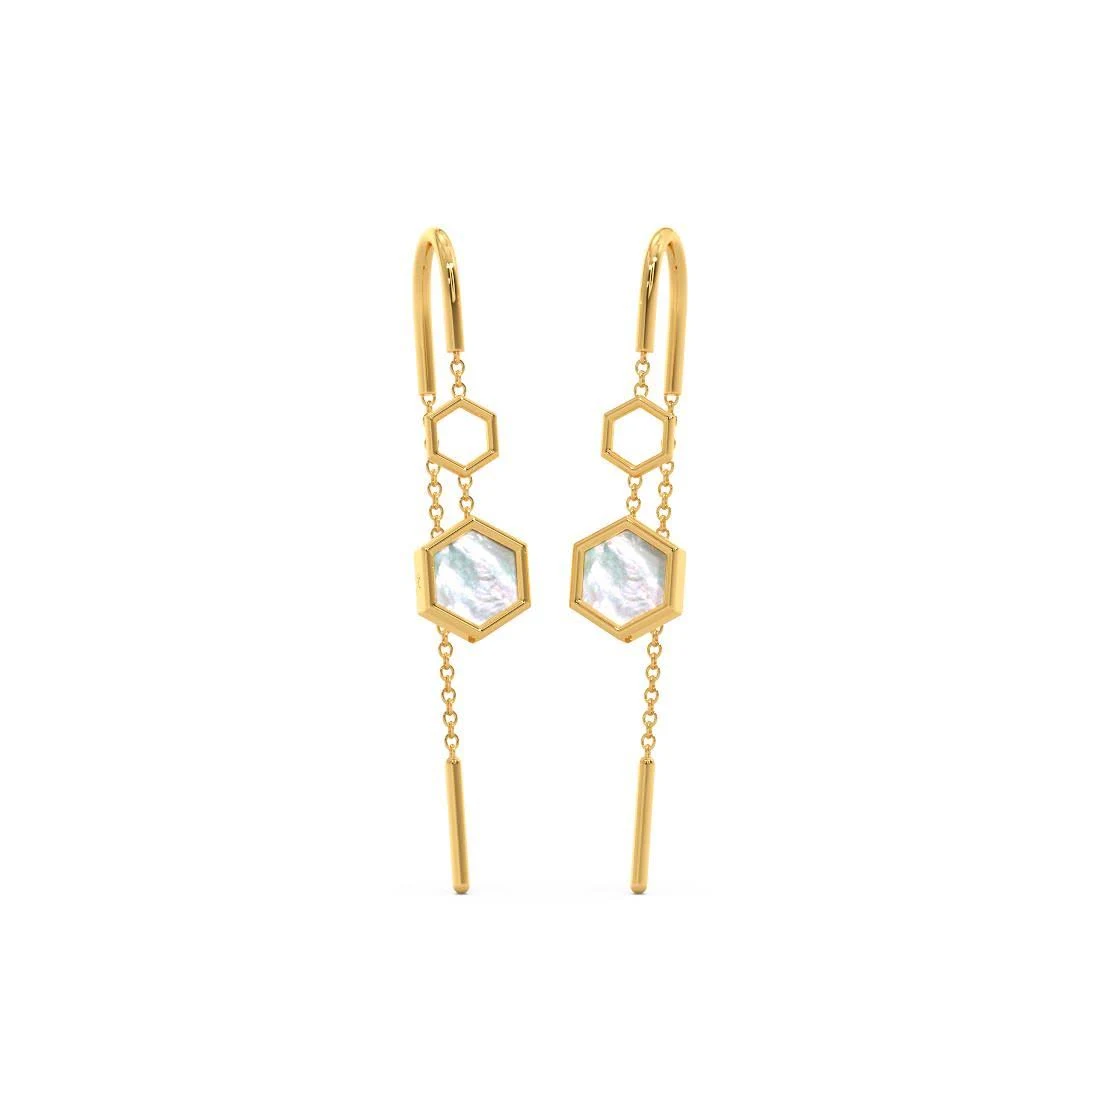 Start Your Sui Dhaga Earrings Collection Today! - The Caratlane